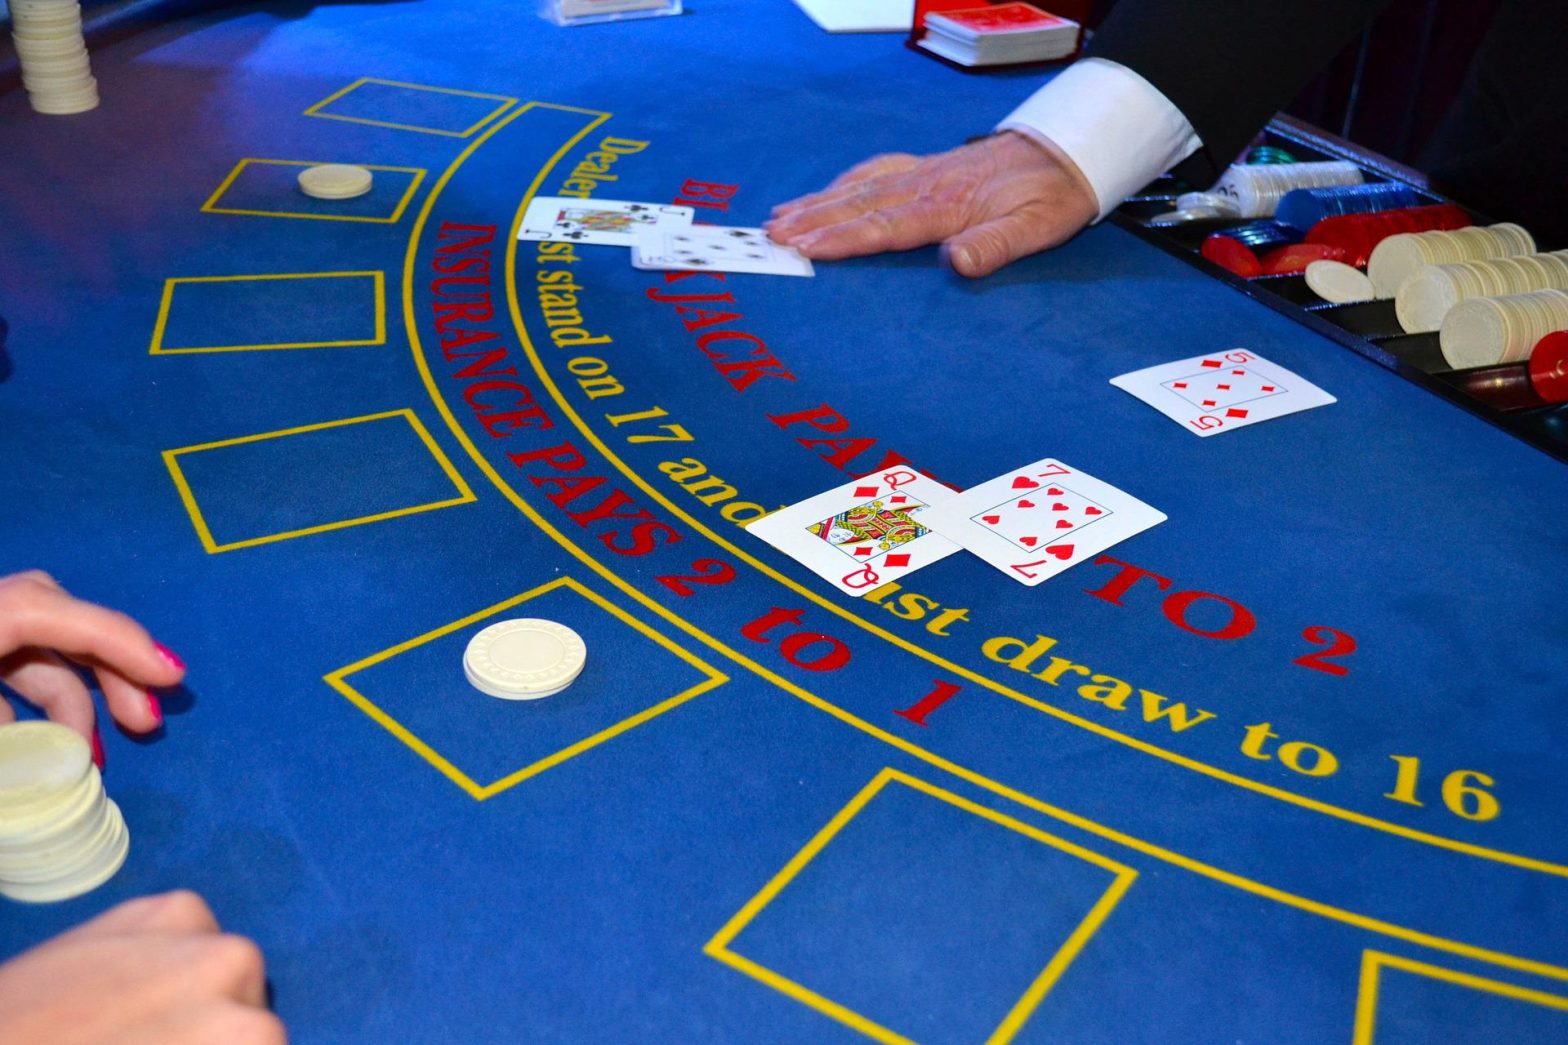 How to win at the casino: 6 games to try your luck